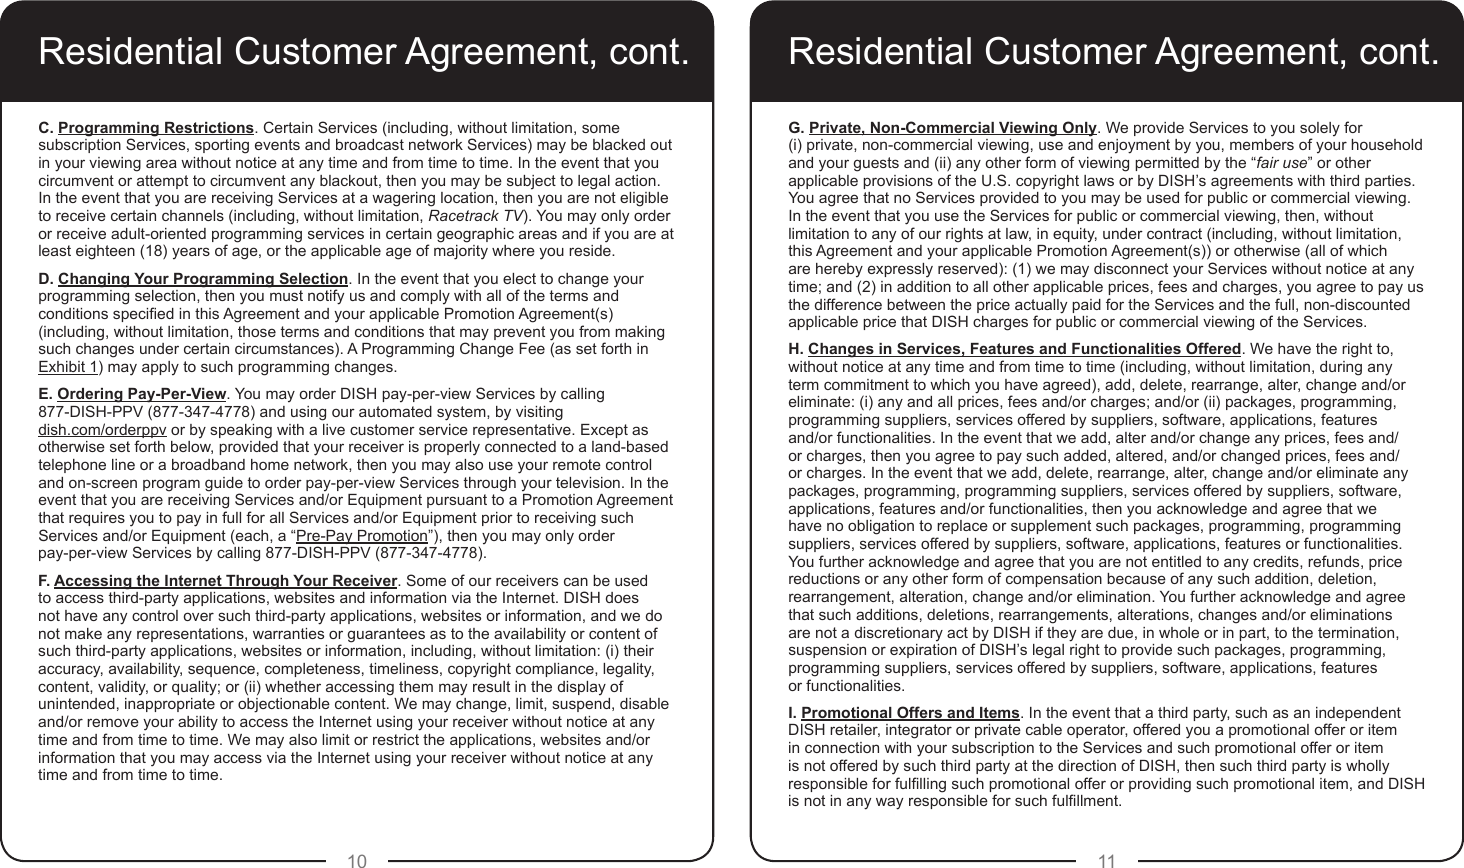 10 11Residential Customer Agreement, cont.C. Programming Restrictions. Certain Services (including, without limitation, some subscription Services, sporting events and broadcast network Services) may be blacked out in your viewing area without notice at any time and from time to time. In the event that you circumvent or attempt to circumvent any blackout, then you may be subject to legal action. In the event that you are receiving Services at a wagering location, then you are not eligible to receive certain channels (including, without limitation, Racetrack TV). You may only order or receive adult-oriented programming services in certain geographic areas and if you are at least eighteen (18) years of age, or the applicable age of majority where you reside.D. Changing Your Programming Selection. In the event that you elect to change your programming selection, then you must notify us and comply with all of the terms and conditions specied in this Agreement and your applicable Promotion Agreement(s) (including, without limitation, those terms and conditions that may prevent you from making such changes under certain circumstances). A Programming Change Fee (as set forth in Exhibit 1) may apply to such programming changes.E. Ordering Pay-Per-View. You may order DISH pay-per-view Services by calling 877-DISH-PPV (877-347-4778) and using our automated system, by visiting  dish.com/orderppv or by speaking with a live customer service representative. Except as otherwise set forth below, provided that your receiver is properly connected to a land-based telephone line or a broadband home network, then you may also use your remote control and on-screen program guide to order pay-per-view Services through your television. In the event that you are receiving Services and/or Equipment pursuant to a Promotion Agreement that requires you to pay in full for all Services and/or Equipment prior to receiving such Services and/or Equipment (each, a “Pre-Pay Promotion”), then you may only order  pay-per-view Services by calling 877-DISH-PPV (877-347-4778).F. Accessing the Internet Through Your Receiver. Some of our receivers can be used to access third-party applications, websites and information via the Internet. DISH does not have any control over such third-party applications, websites or information, and we do not make any representations, warranties or guarantees as to the availability or content of such third-party applications, websites or information, including, without limitation: (i) their accuracy, availability, sequence, completeness, timeliness, copyright compliance, legality, content, validity, or quality; or (ii) whether accessing them may result in the display of unintended, inappropriate or objectionable content. We may change, limit, suspend, disable and/or remove your ability to access the Internet using your receiver without notice at any time and from time to time. We may also limit or restrict the applications, websites and/or information that you may access via the Internet using your receiver without notice at any time and from time to time.G. Private, Non-Commercial Viewing Only. We provide Services to you solely for  (i) private, non-commercial viewing, use and enjoyment by you, members of your household and your guests and (ii) any other form of viewing permitted by the “fair use” or other applicable provisions of the U.S. copyright laws or by DISH’s agreements with third parties. You agree that no Services provided to you may be used for public or commercial viewing. In the event that you use the Services for public or commercial viewing, then, without limitation to any of our rights at law, in equity, under contract (including, without limitation, this Agreement and your applicable Promotion Agreement(s)) or otherwise (all of which are hereby expressly reserved): (1) we may disconnect your Services without notice at any time; and (2) in addition to all other applicable prices, fees and charges, you agree to pay us the difference between the price actually paid for the Services and the full, non-discounted applicable price that DISH charges for public or commercial viewing of the Services. H. Changes in Services, Features and Functionalities Offered. We have the right to, without notice at any time and from time to time (including, without limitation, during any term commitment to which you have agreed), add, delete, rearrange, alter, change and/or eliminate: (i) any and all prices, fees and/or charges; and/or (ii) packages, programming, programming suppliers, services offered by suppliers, software, applications, features and/or functionalities. In the event that we add, alter and/or change any prices, fees and/or charges, then you agree to pay such added, altered, and/or changed prices, fees and/or charges. In the event that we add, delete, rearrange, alter, change and/or eliminate any packages, programming, programming suppliers, services offered by suppliers, software, applications, features and/or functionalities, then you acknowledge and agree that we have no obligation to replace or supplement such packages, programming, programming suppliers, services offered by suppliers, software, applications, features or functionalities. You further acknowledge and agree that you are not entitled to any credits, refunds, price reductions or any other form of compensation because of any such addition, deletion, rearrangement, alteration, change and/or elimination. You further acknowledge and agree that such additions, deletions, rearrangements, alterations, changes and/or eliminations are not a discretionary act by DISH if they are due, in whole or in part, to the termination, suspension or expiration of DISH’s legal right to provide such packages, programming, programming suppliers, services offered by suppliers, software, applications, features  or functionalities.I. Promotional Offers and Items. In the event that a third party, such as an independent DISH retailer, integrator or private cable operator, offered you a promotional offer or item in connection with your subscription to the Services and such promotional offer or item is not offered by such third party at the direction of DISH, then such third party is wholly responsible for fullling such promotional offer or providing such promotional item, and DISH is not in any way responsible for such fulllment.Residential Customer Agreement, cont.